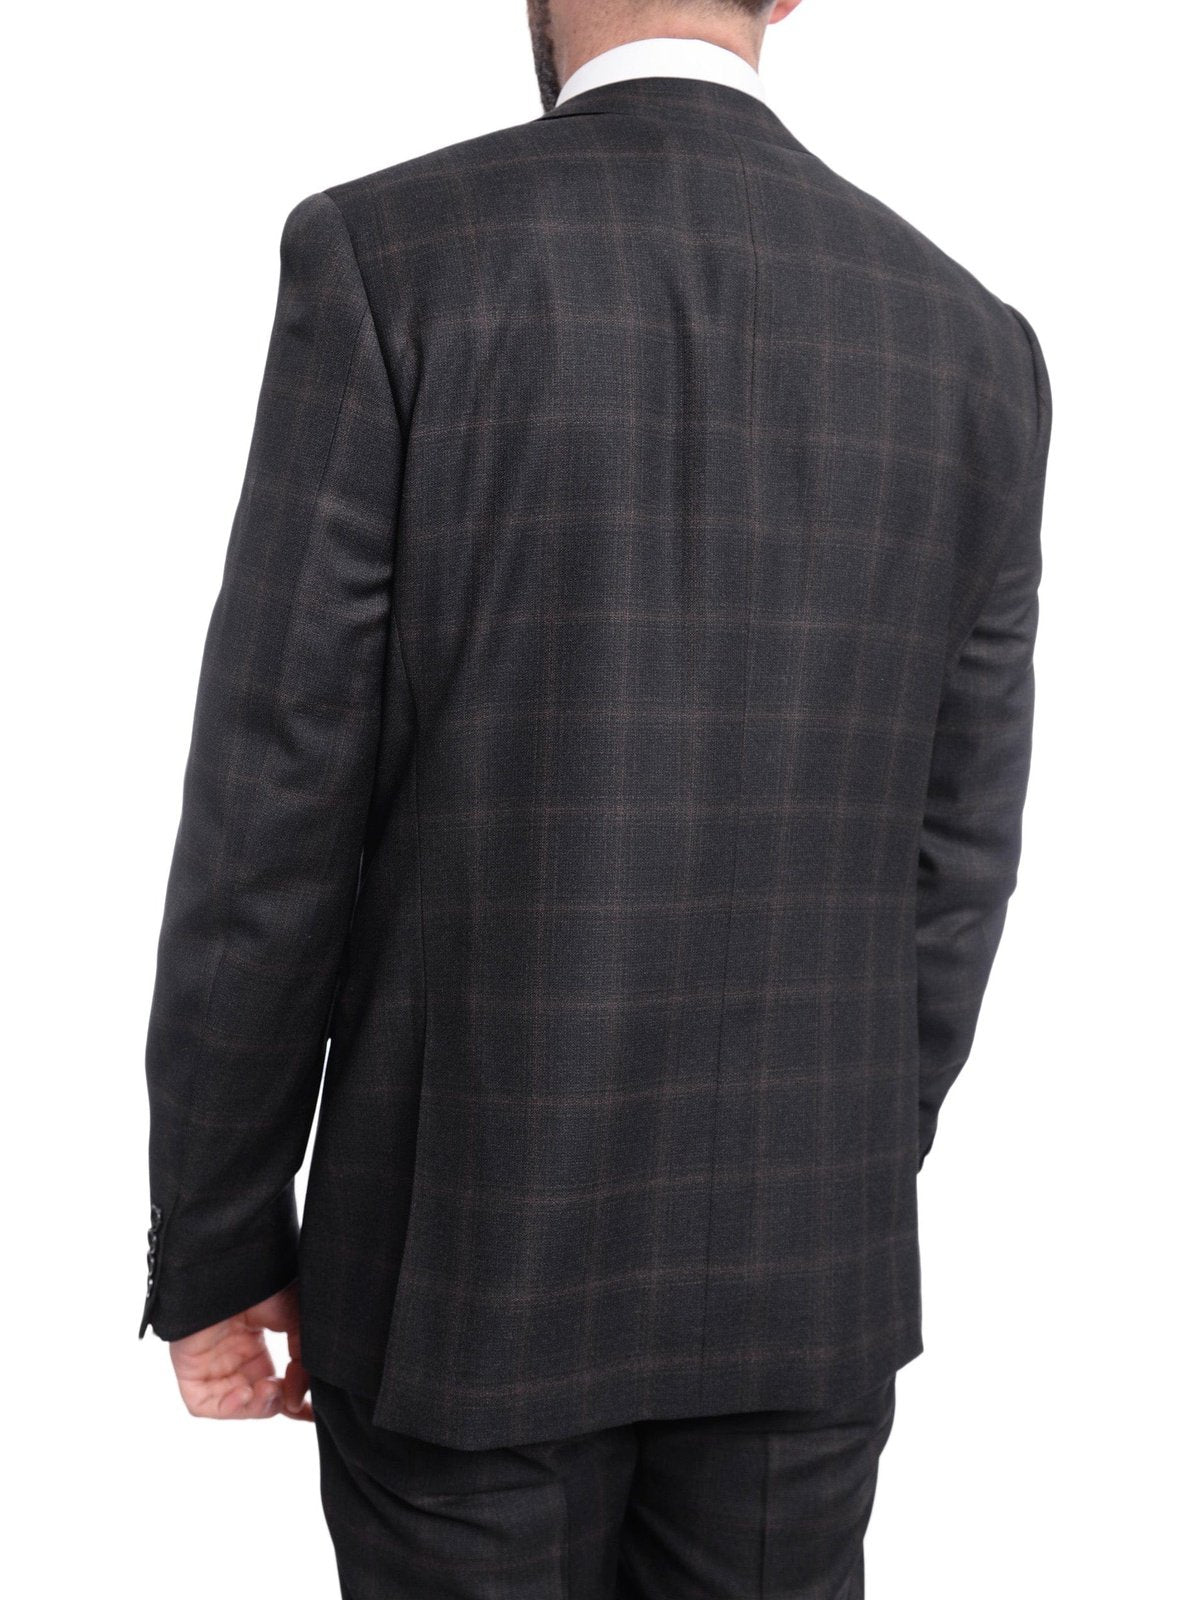 Napoli TWO PIECE SUITS Napoli Slim Fit Charcoal Gray With Brown Plaid Half Canvassed Wool Suit